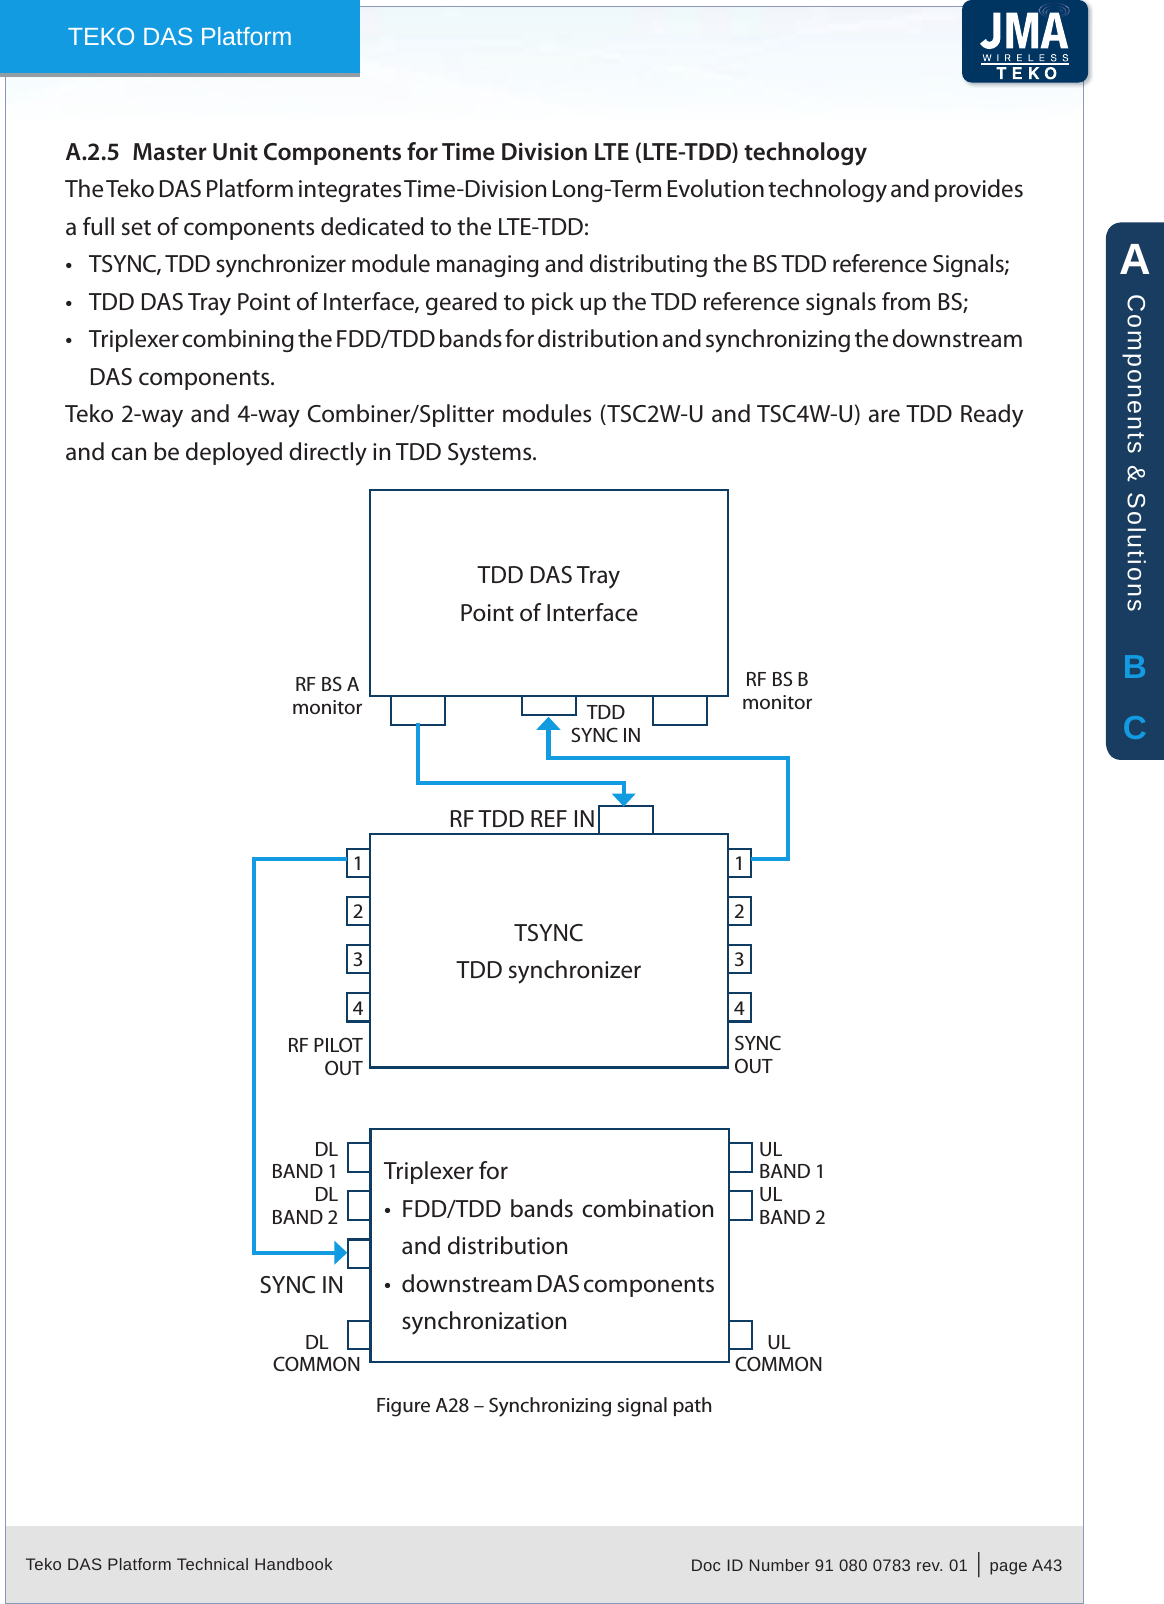 Teko DAS Platform Technical Handbook Doc ID Number 91 080 0783 rev. 01  |  page A43TEKO DAS PlatformMaster Unit Components for Time Division LTE (LTE-TDD) technologyA.2.5 The Teko DAS Platform integrates Time-Division Long-Term Evolution technology and provides a full set of components dedicated to the LTE-TDD:TSYNC, TDD synchronizer module managing and distributing the BS TDD reference Signals;•TDD DAS Tray Point of Interface, geared to pick up the TDD reference signals from BS;•Triplexer combining the FDD/TDD bands for distribution and • synchronizing the downstream DAS components.Teko 2-way and 4-way Combiner/Splitter modules (TSC2W-U and TSC4W-U) are TDD Ready and can be deployed directly in TDD Systems.TSYNCTDD synchronizerTriplexer forFDD/TDD bands combination •and distributiondownstream DAS components •synchronizationTDD DAS TrayPoint of InterfaceTDDSYNC INRF TDD REF INRF BS A monitorRF BS B monitorRF PILOT OUTSYNCOUT1 12 23 34 4SYNC INDLCOMMONULCOMMONULBAND 1DLBAND 1ULBAND 2DLBAND 2Synchronizing signal pathFigure A28 – ABCComponents &amp; Solutions